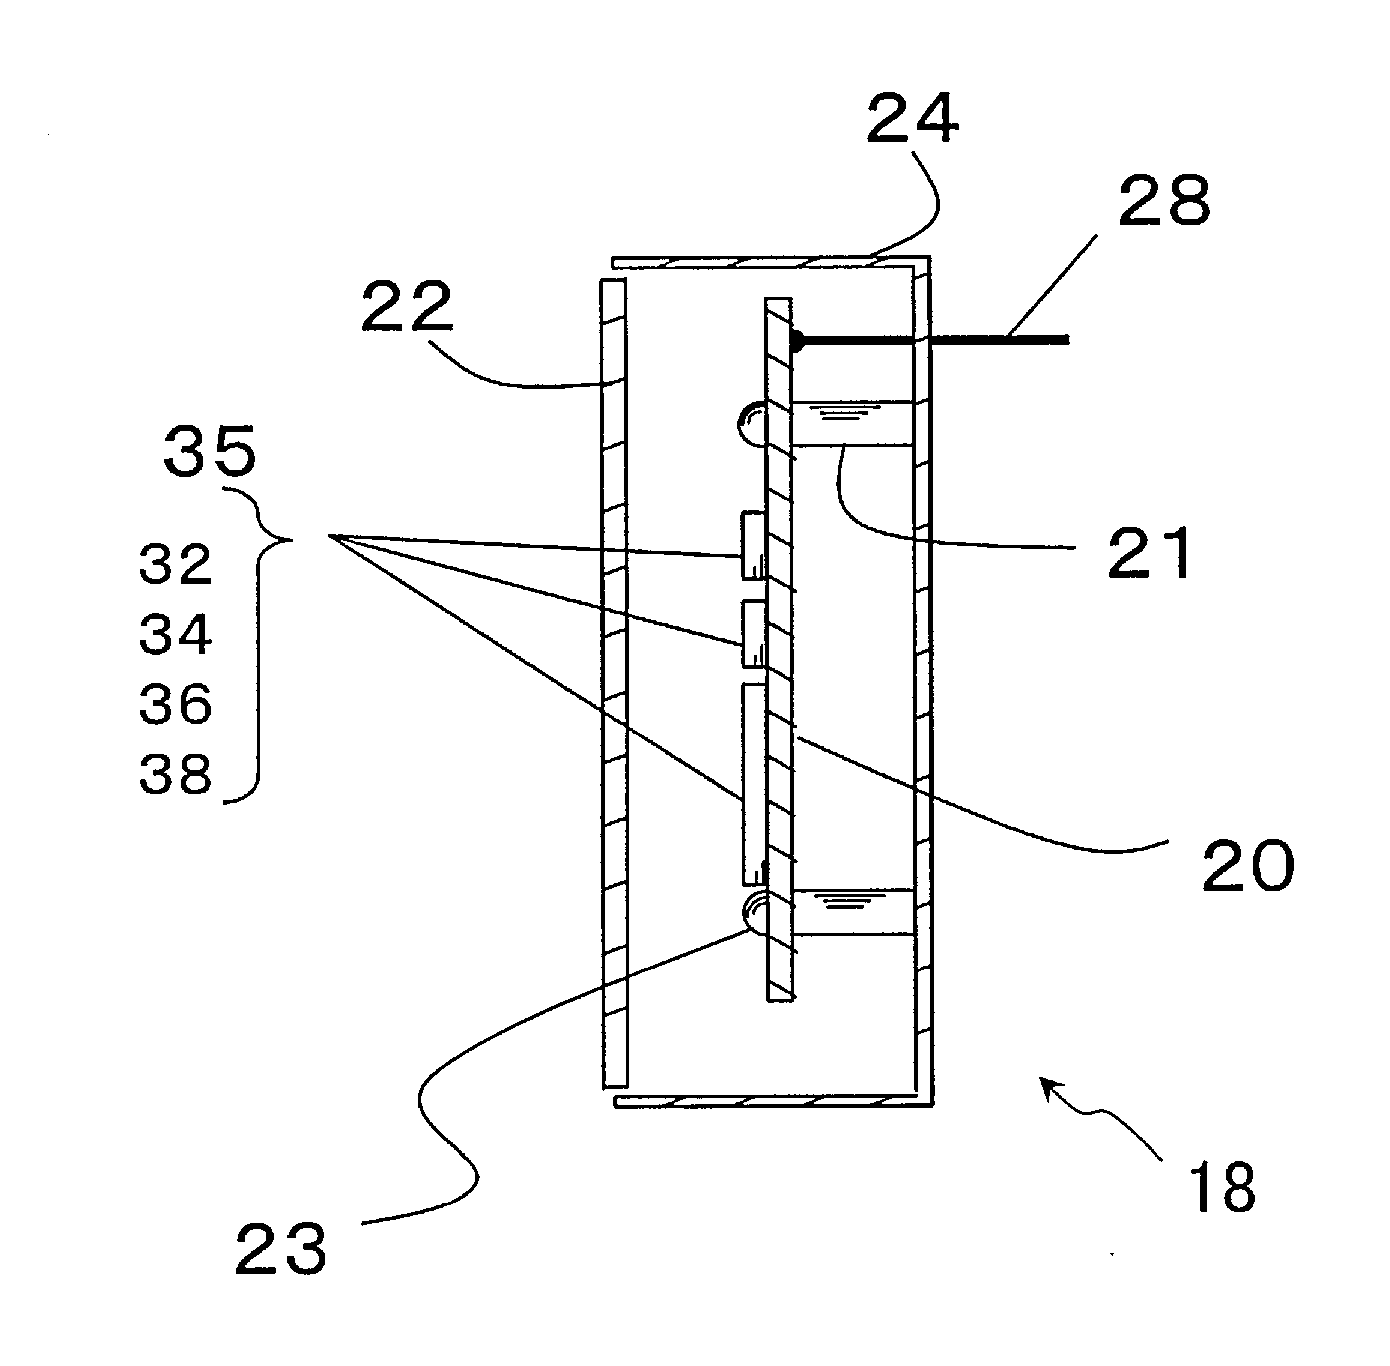 Camera with interchangeable lenses having electrical circuitry